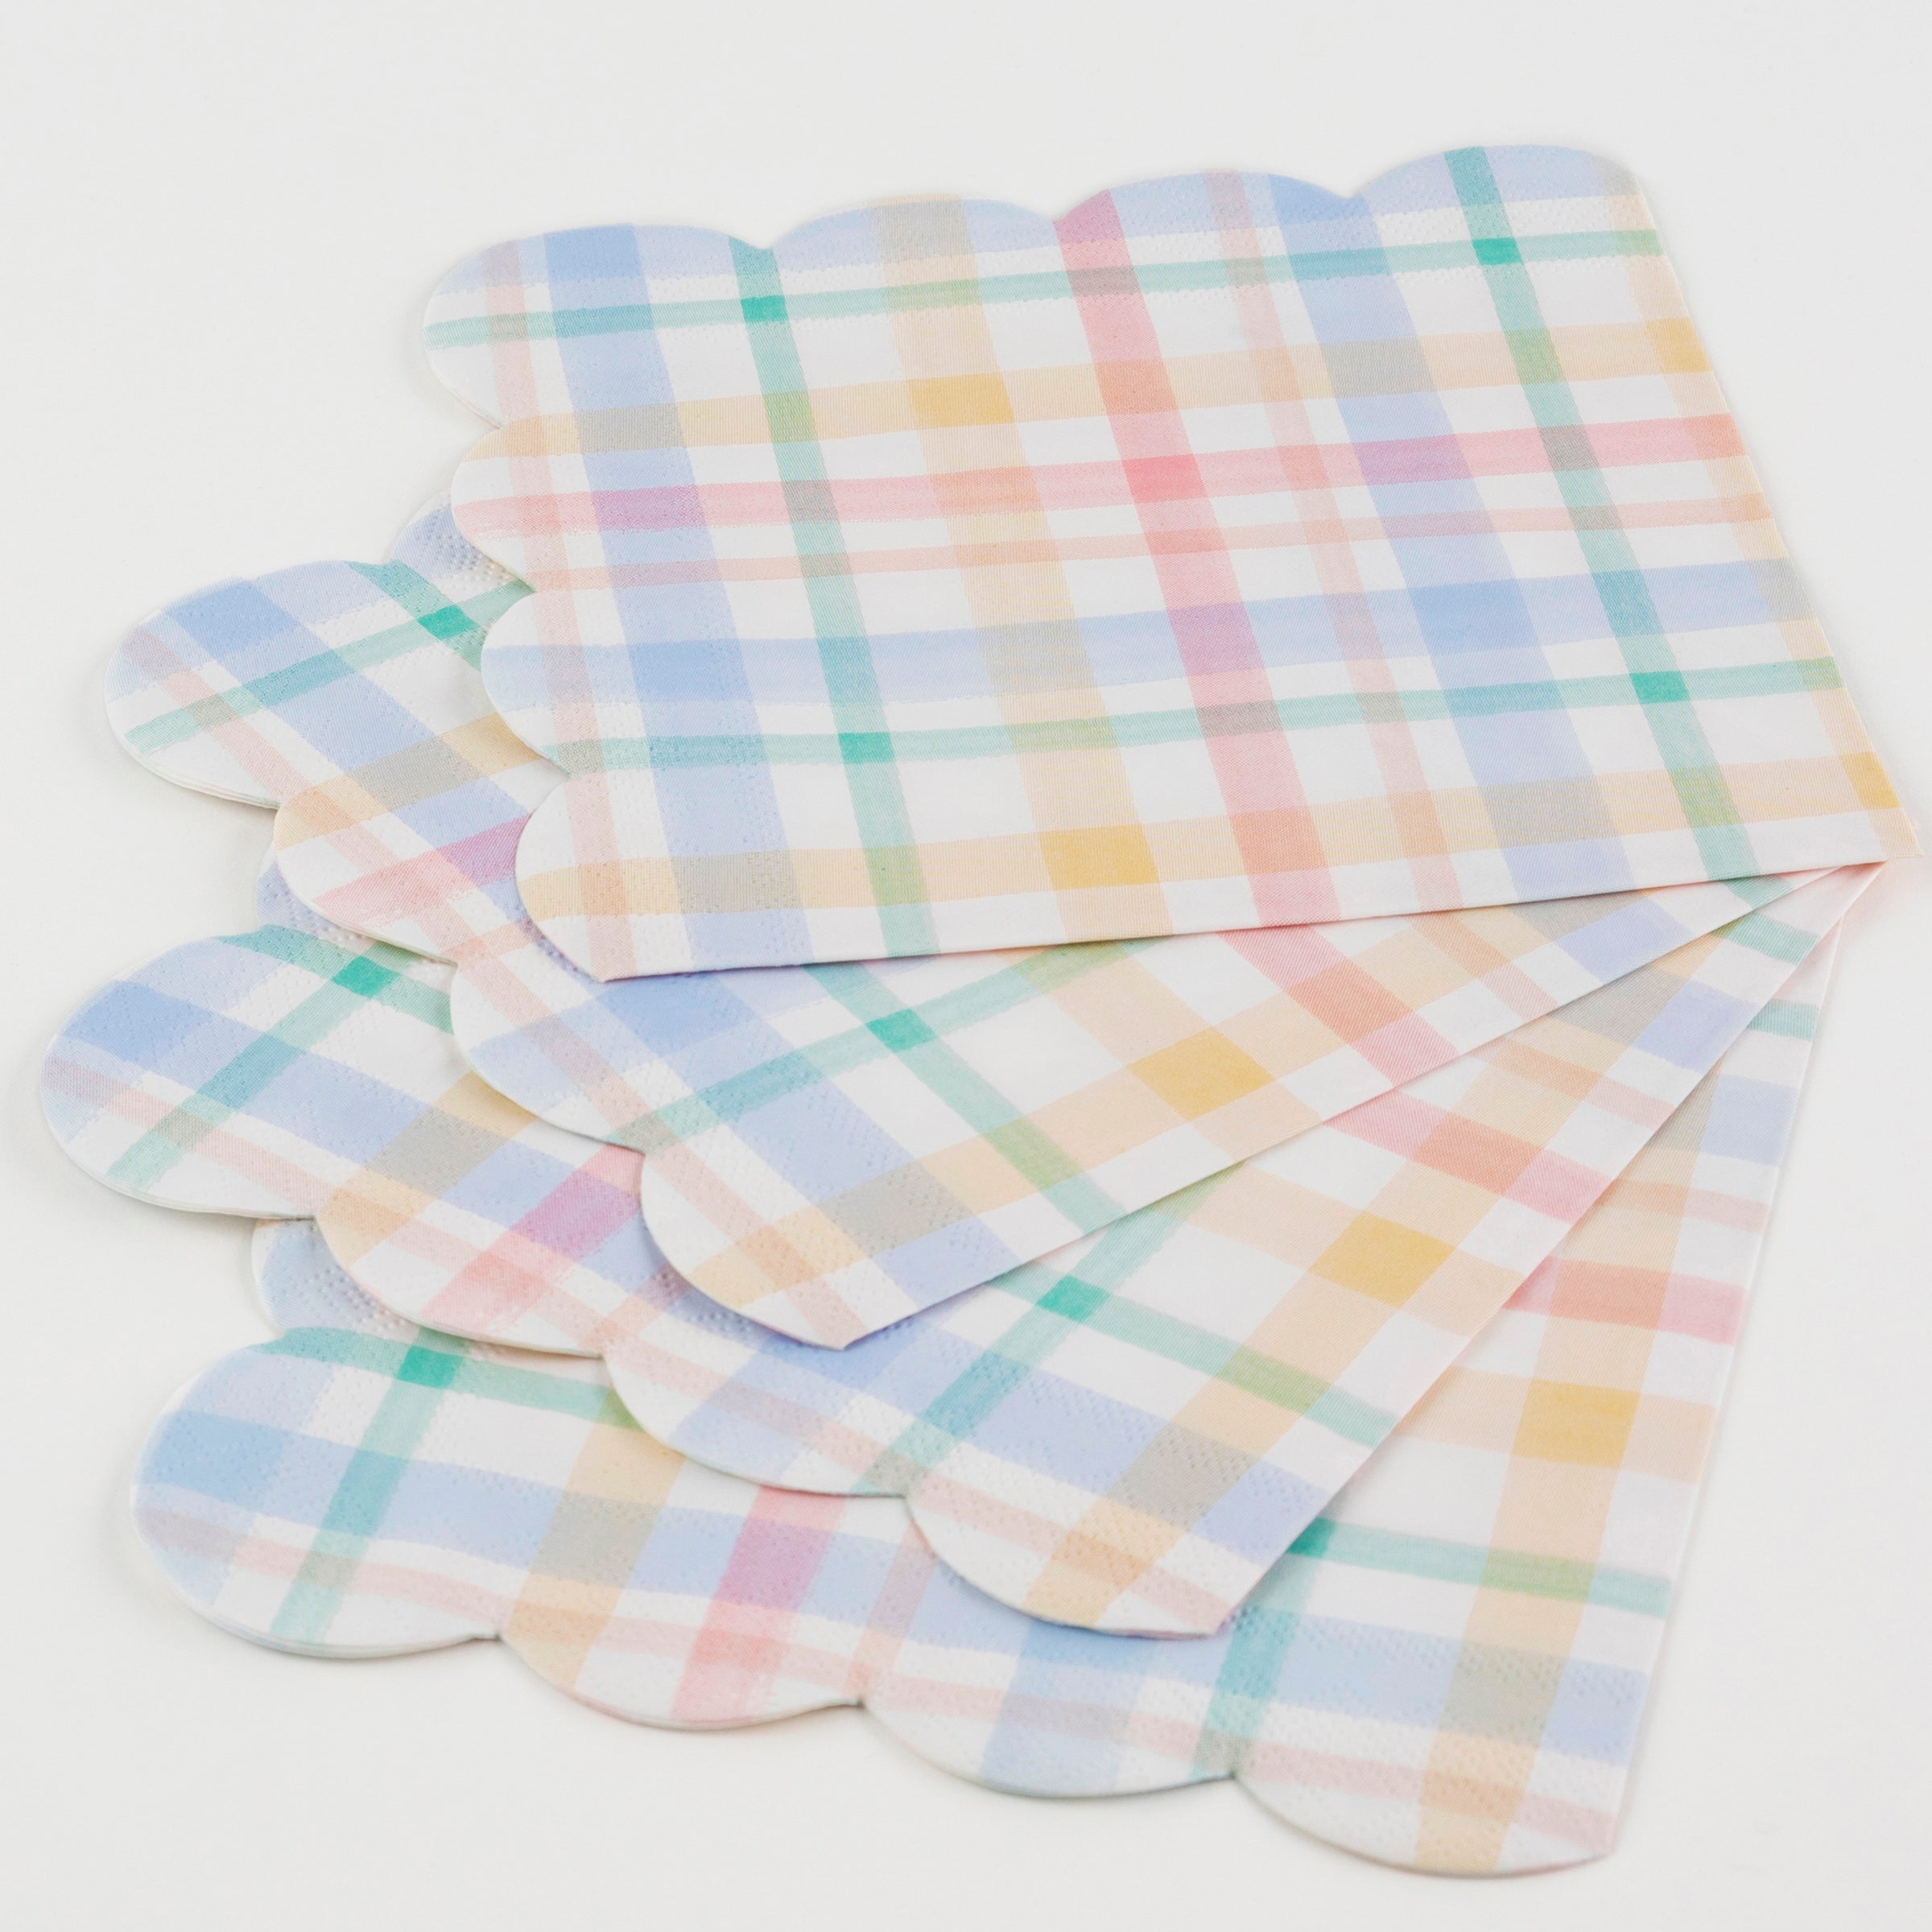 Our napkins are perfect for baby shower decoration ideas.